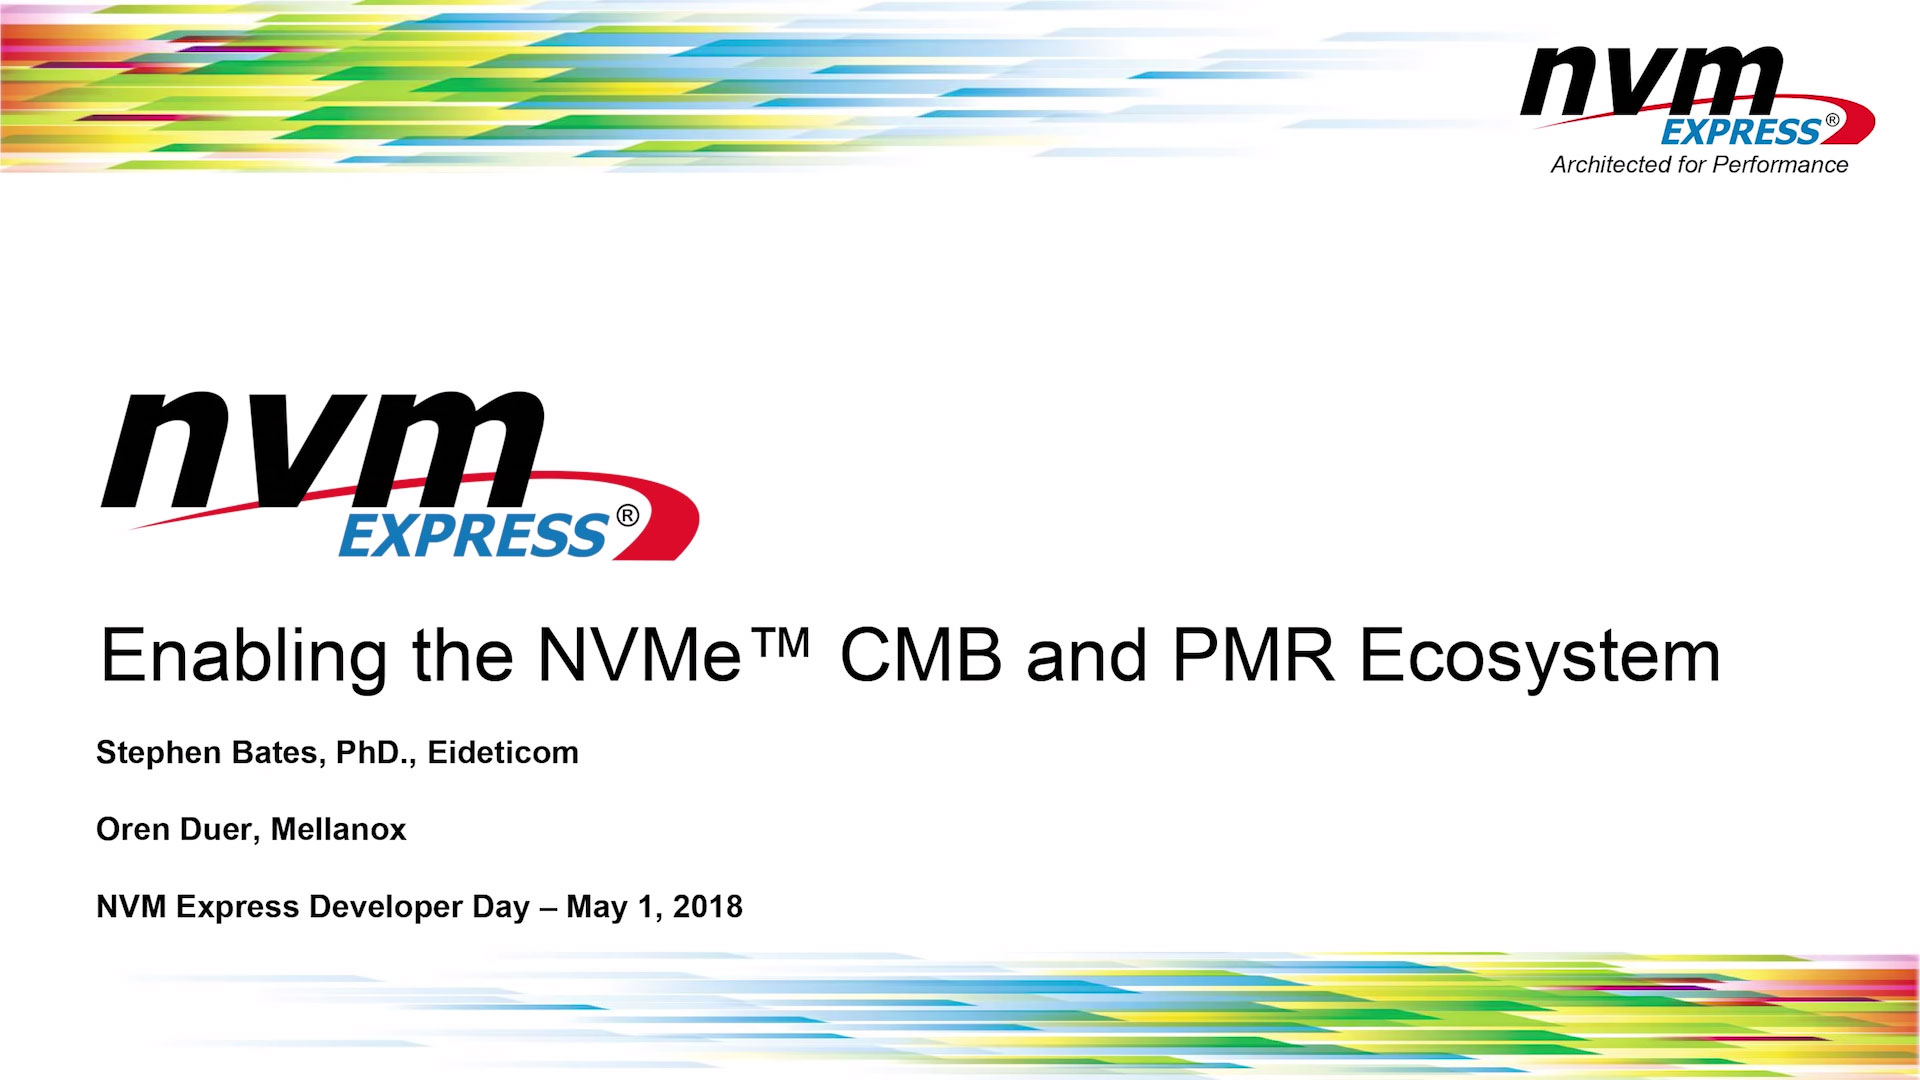 Enabling the NVMe CMB and PMR Ecosystem